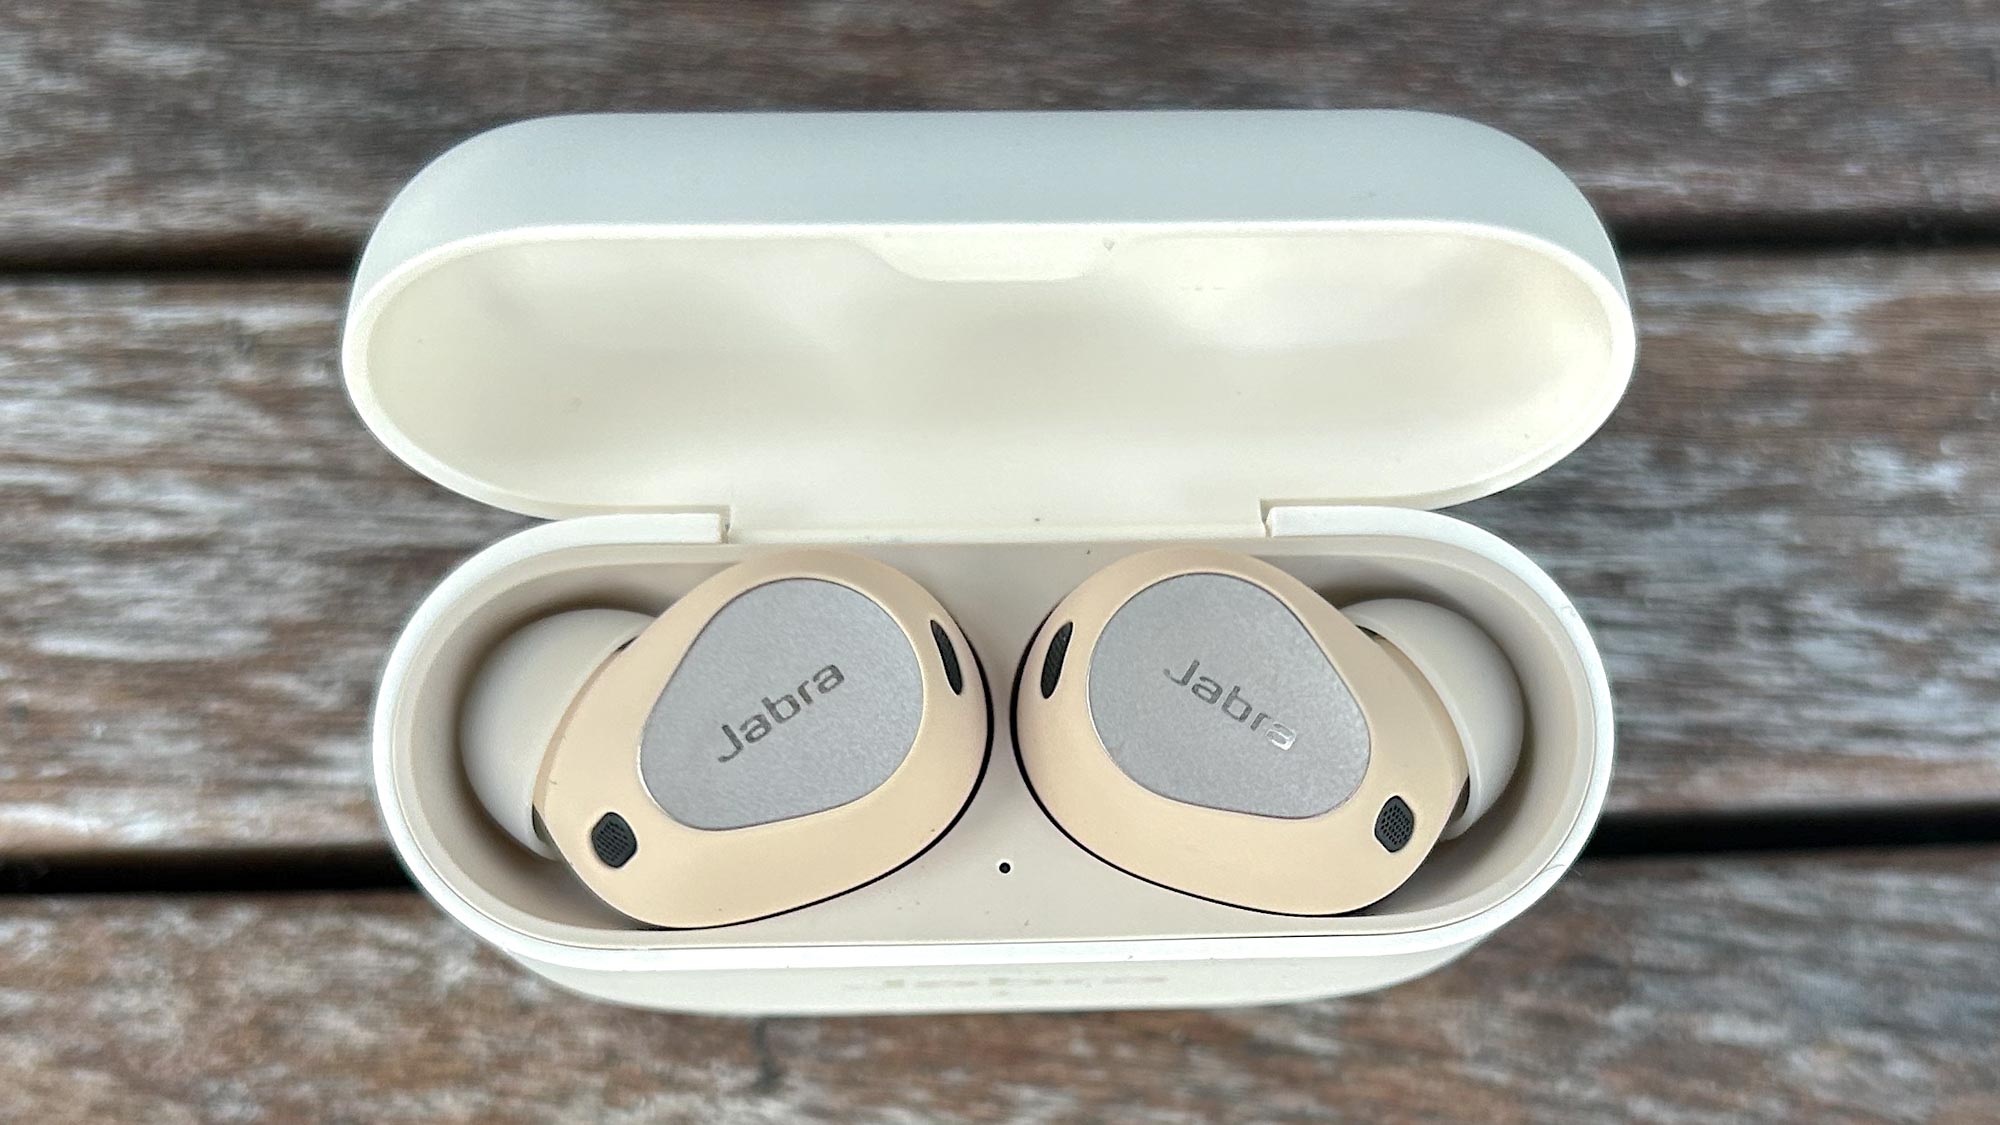 Jabra Elite 10 close up of earbuds in charging case with lid open